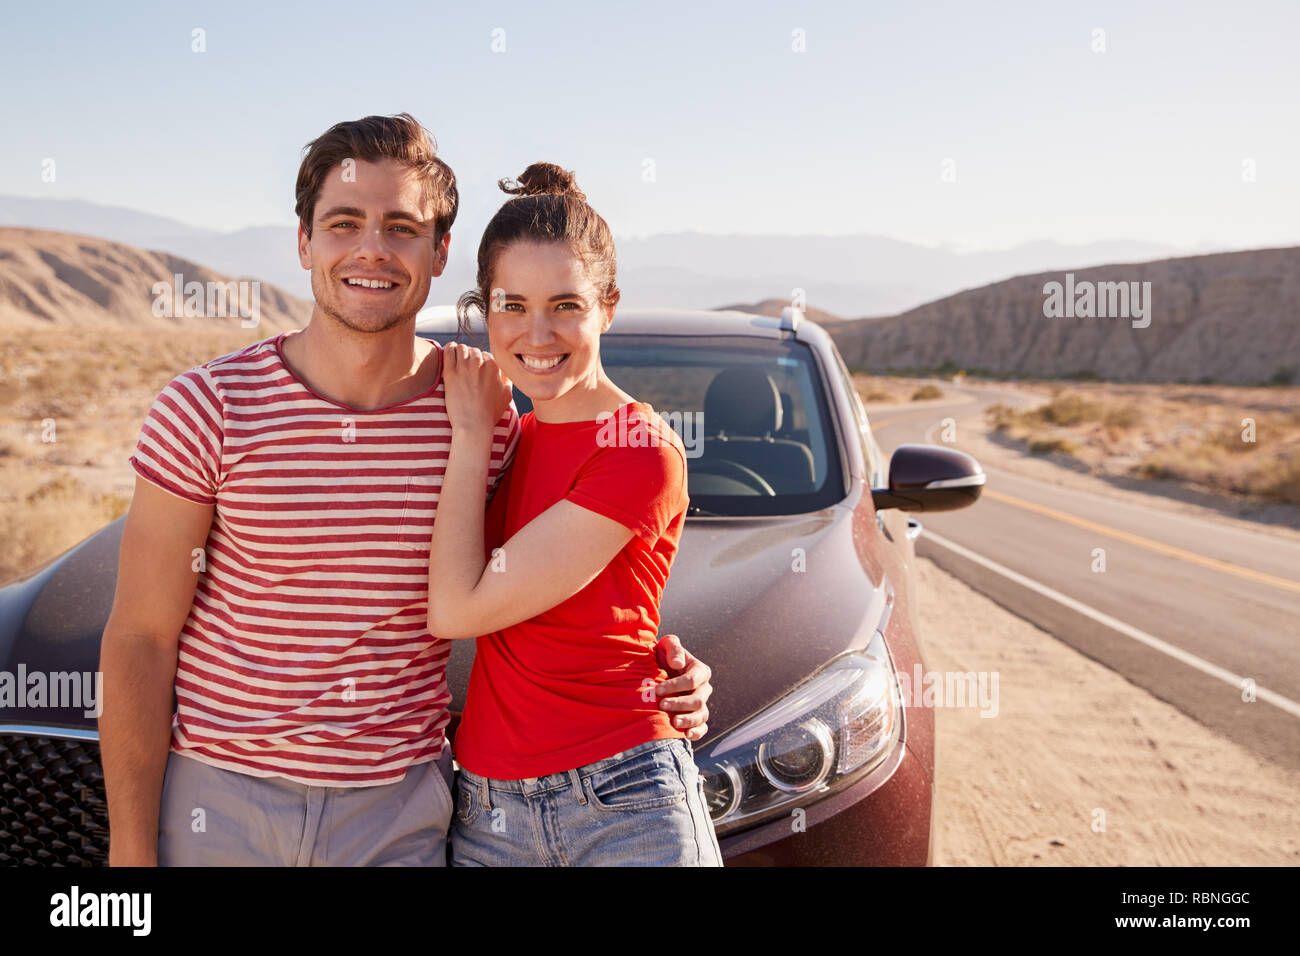 Young white couple standing on desert roadside by car Stock Photo